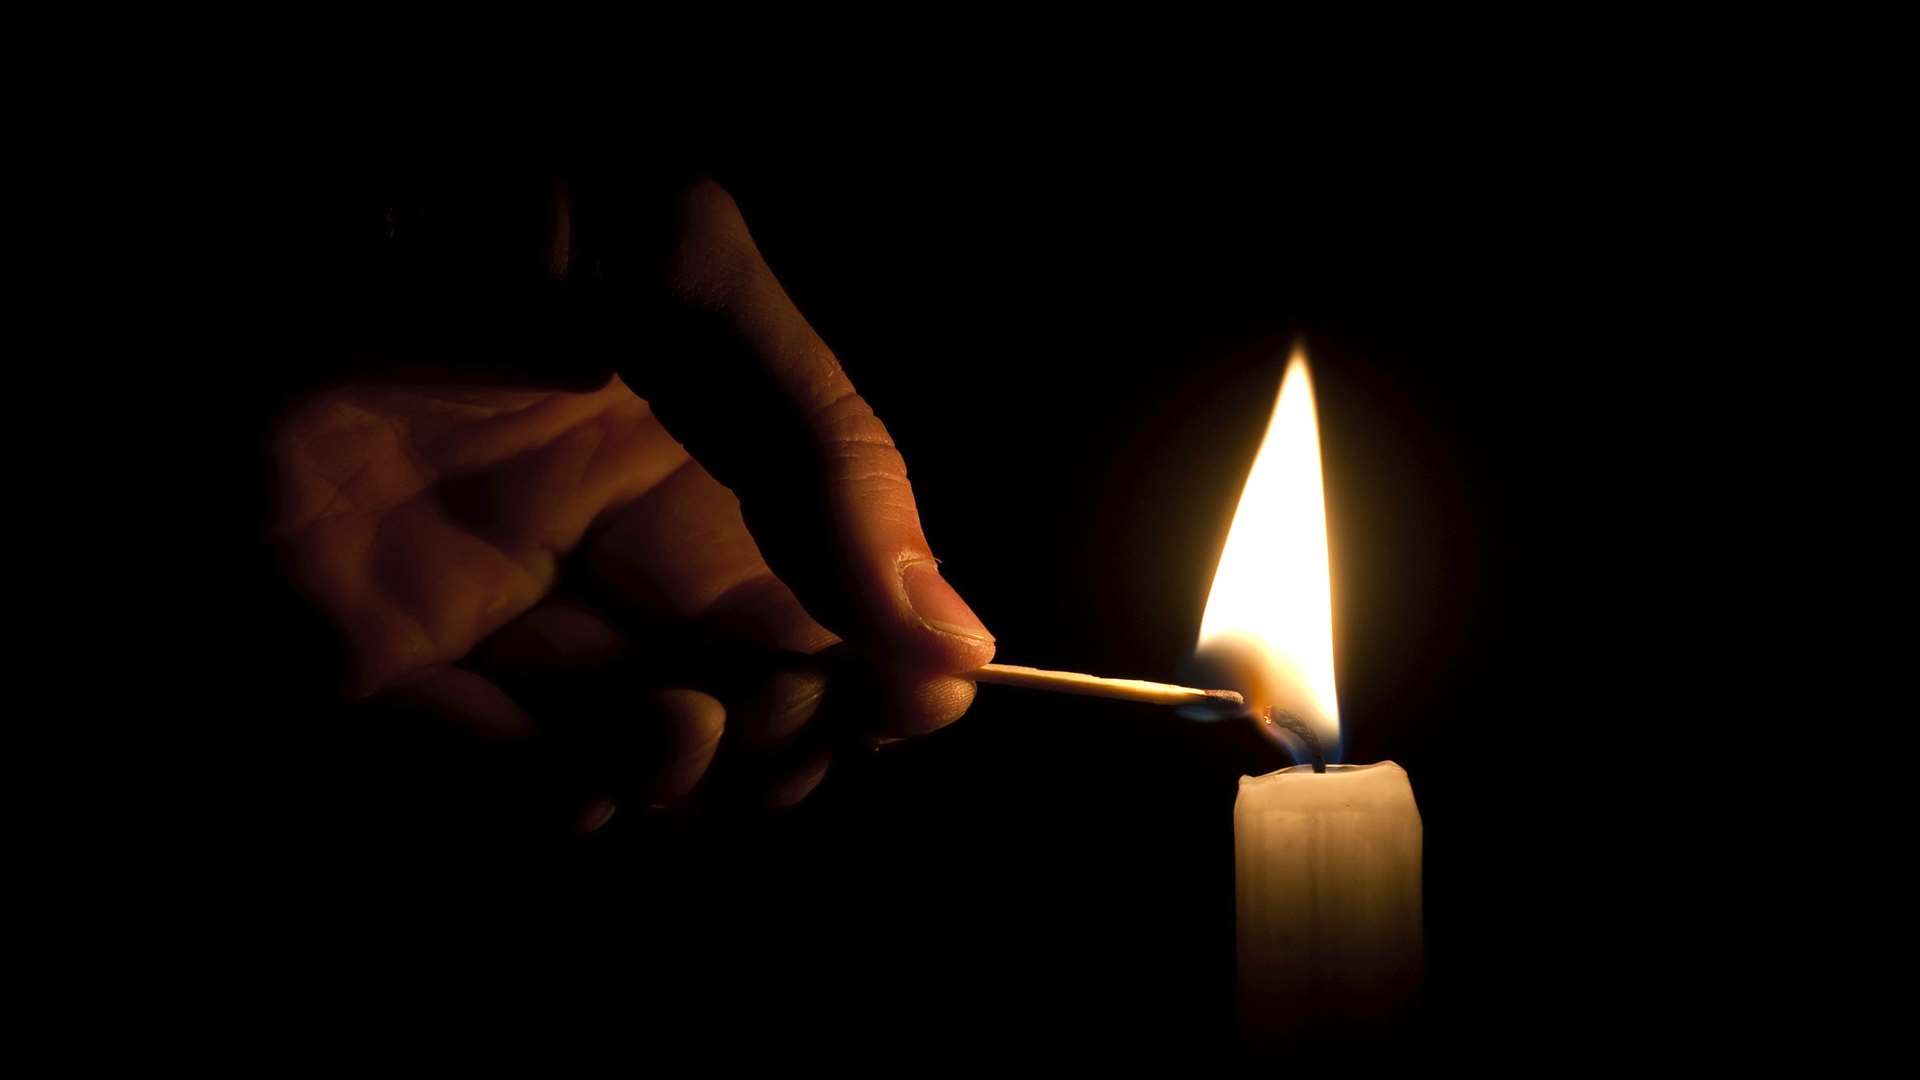 A lit candle started the fire. Library image